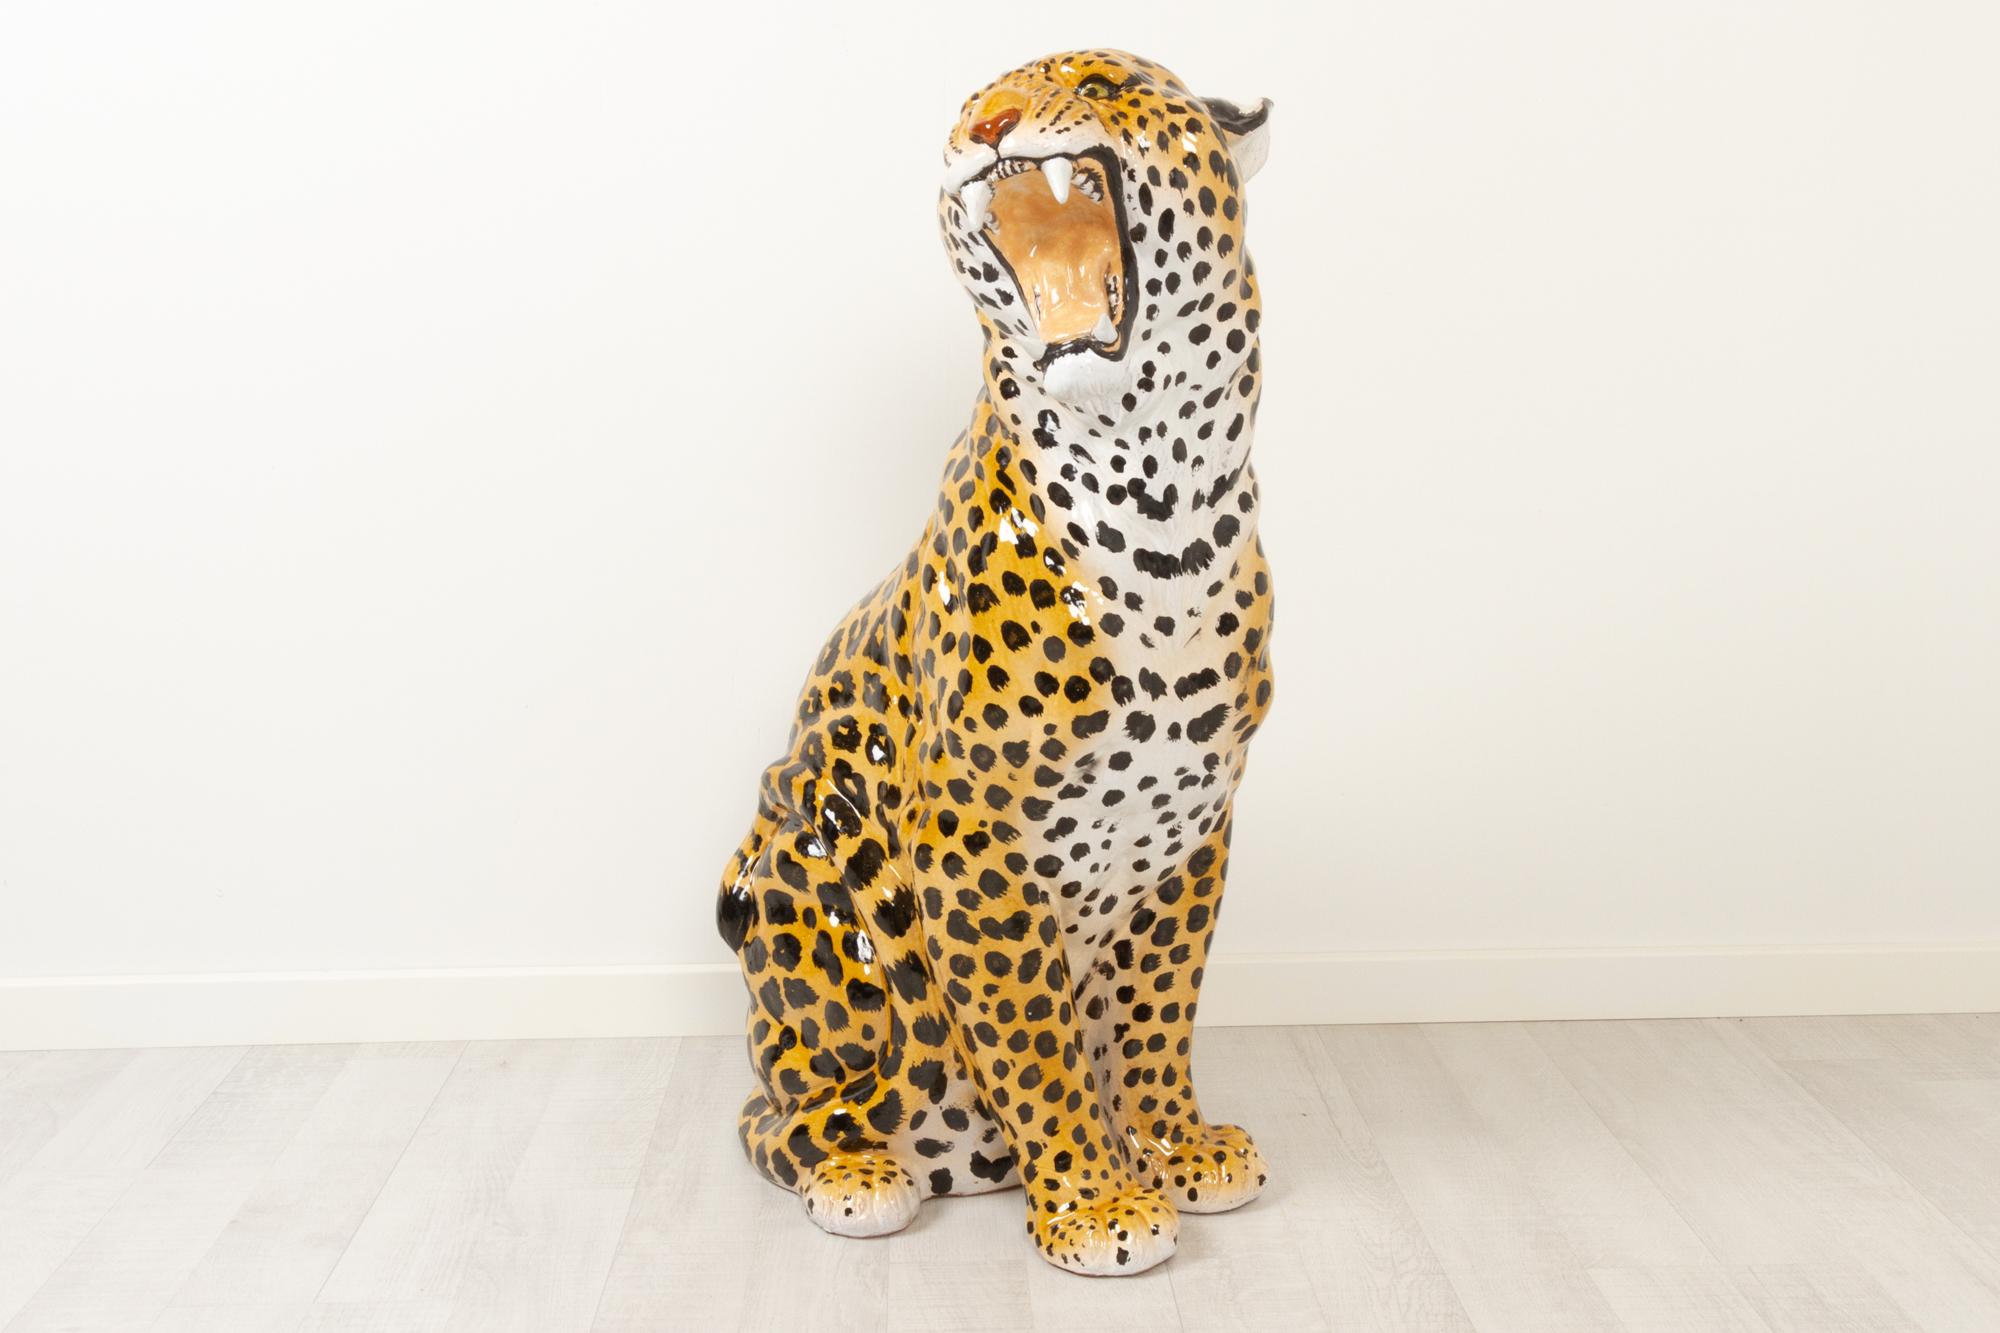 Vintage Italian life-size terracotta leopard, 1960s
A stunning large hand painted ceramic animal sculpture of a sitting Leopard. Life-size and anatomically correct big cat sculpture. Made in Italy in the sixties.
In excellent condition and marked